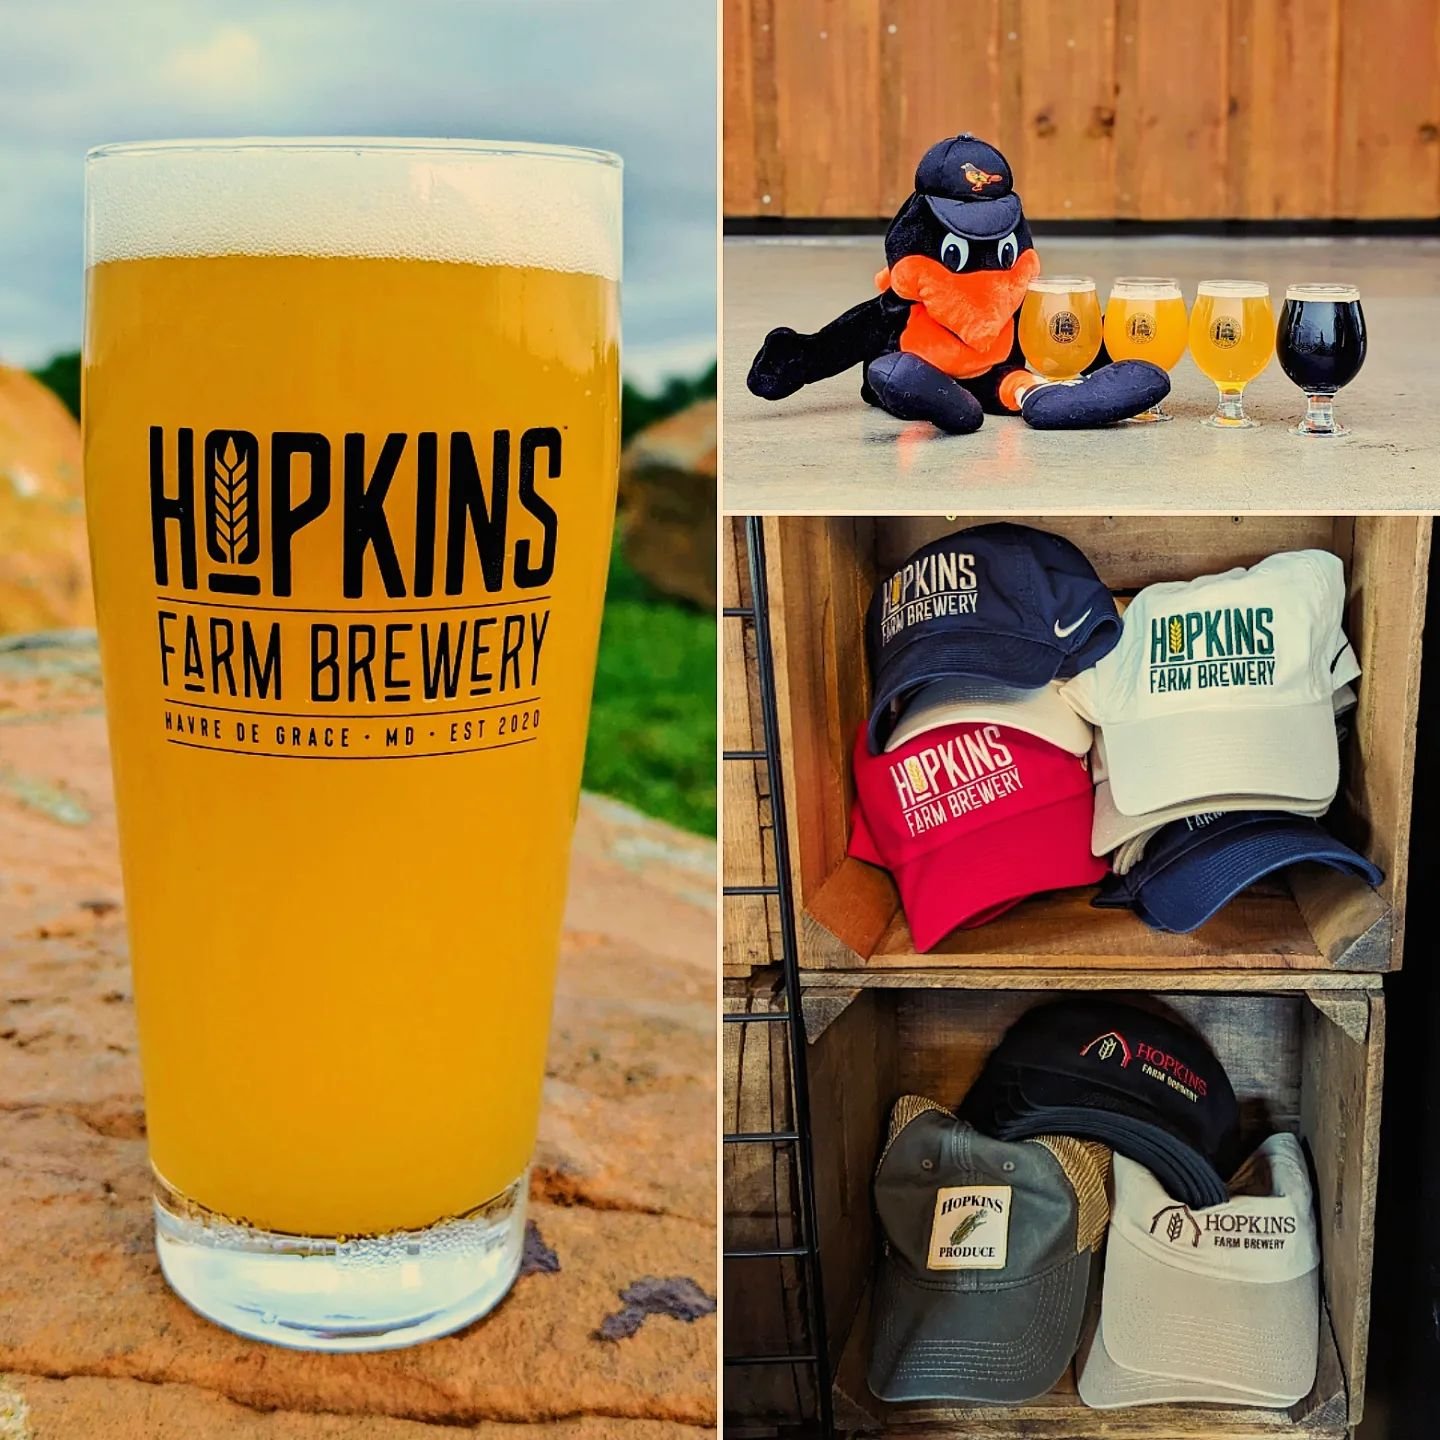 ⚾🧢 Now on tap, Rally Cap West Coast IPA!
Turn those hats backwards and get ready for a miracle. Bold West Coast hops of Simcoe, Cascade, and Amarillo serve as a trio of heavy hitters that'll get you on your feet. Rally Cap is best served cold with a